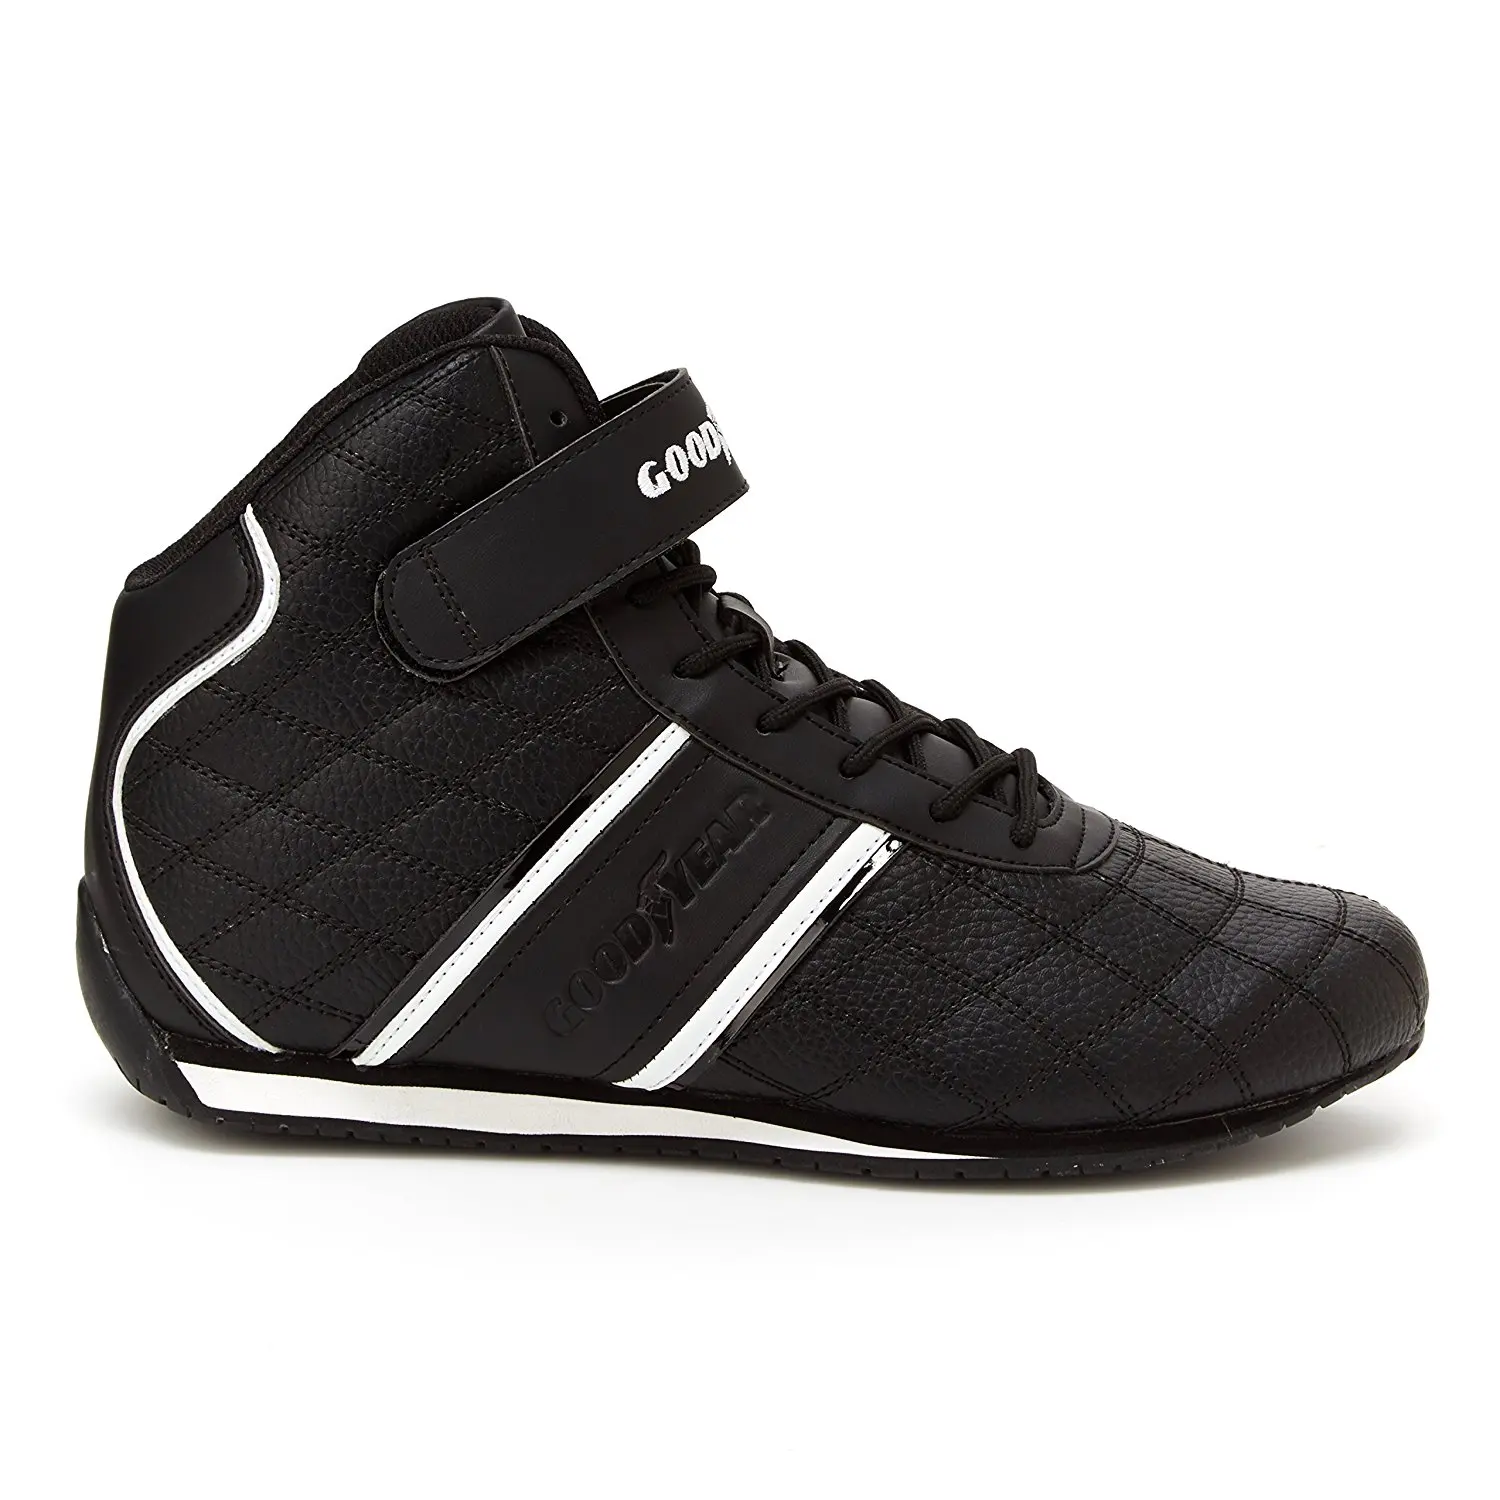 adidas goodyear shoes for sale